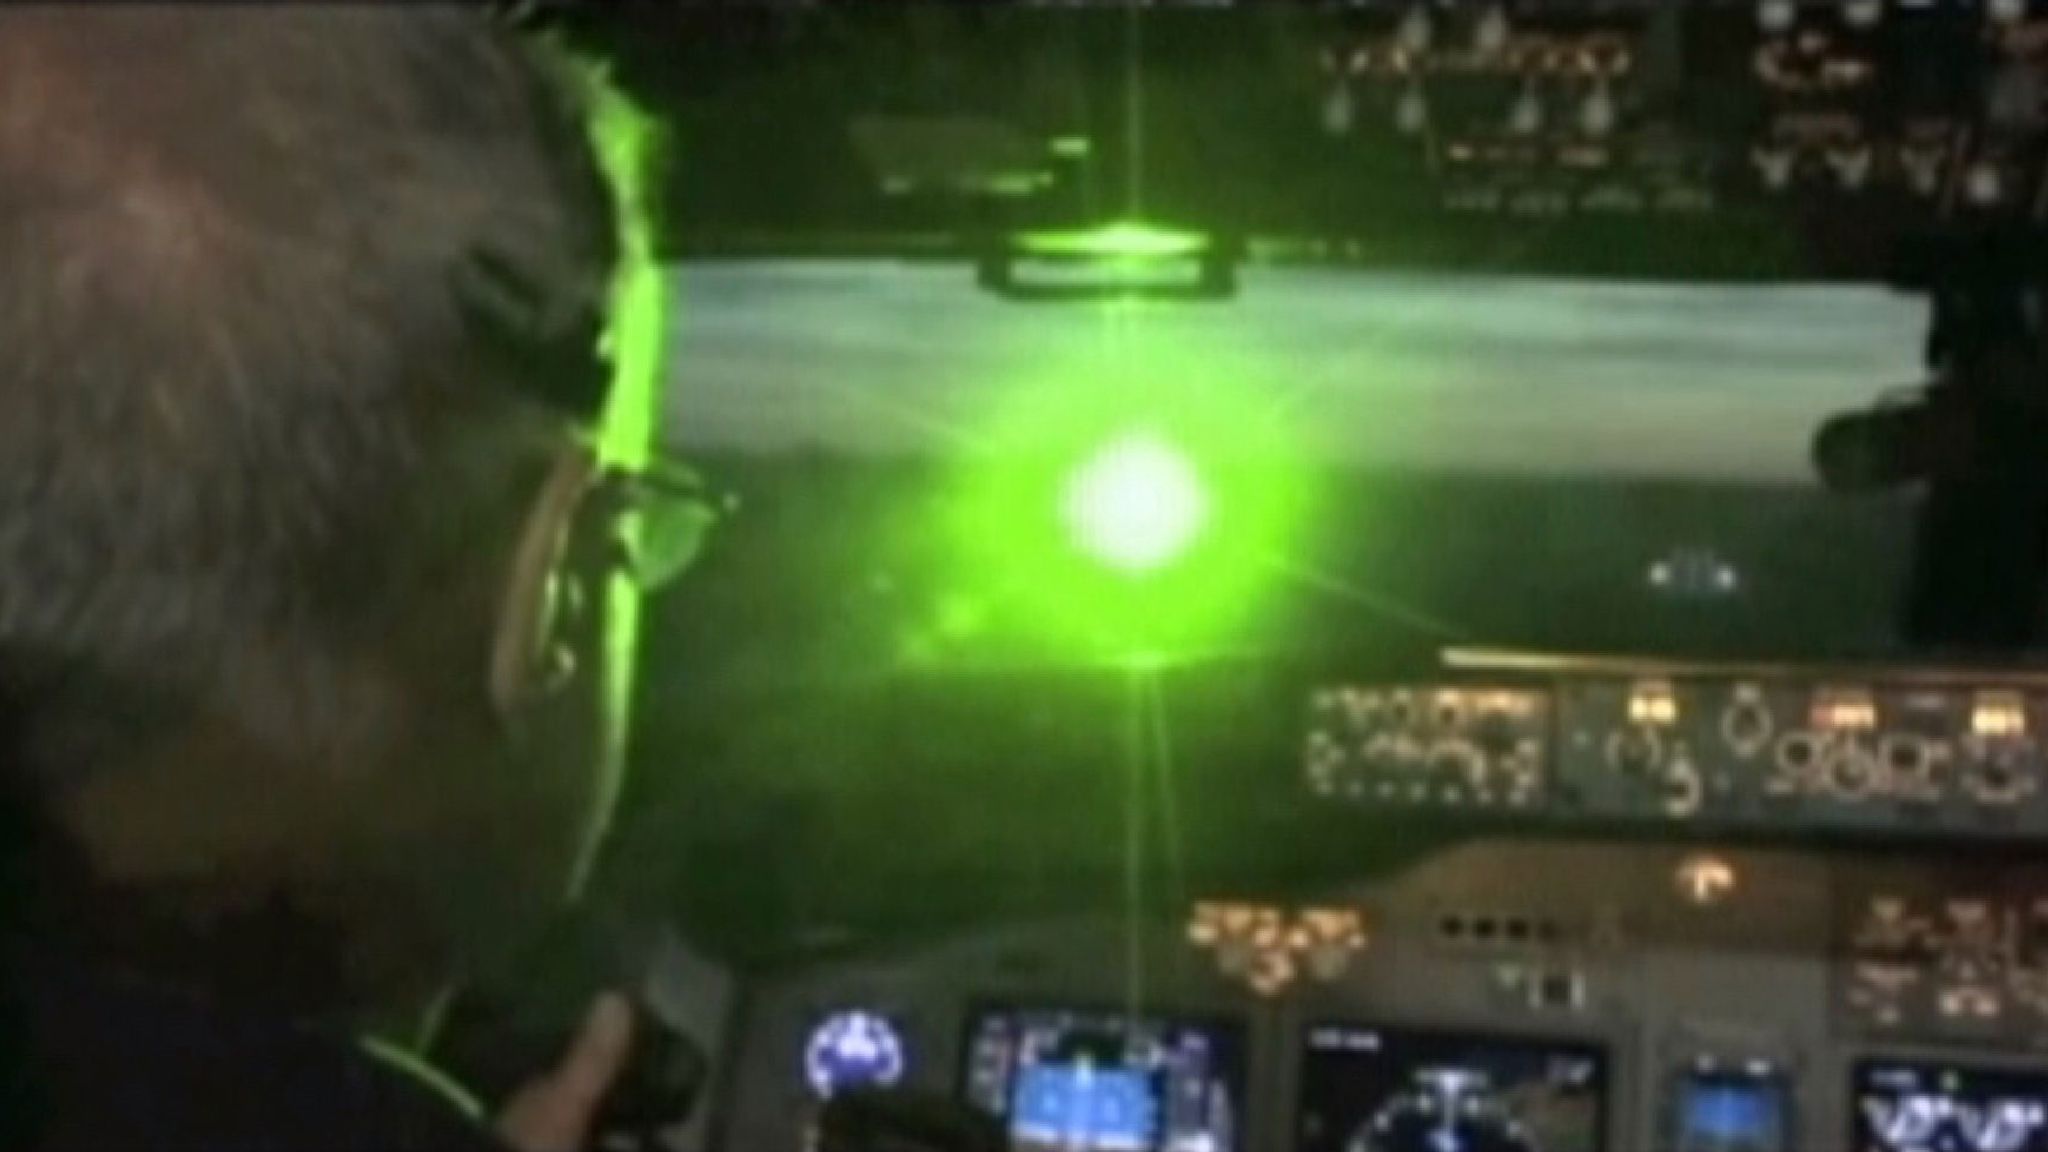 Government considers laser pointer licences in crackdown after